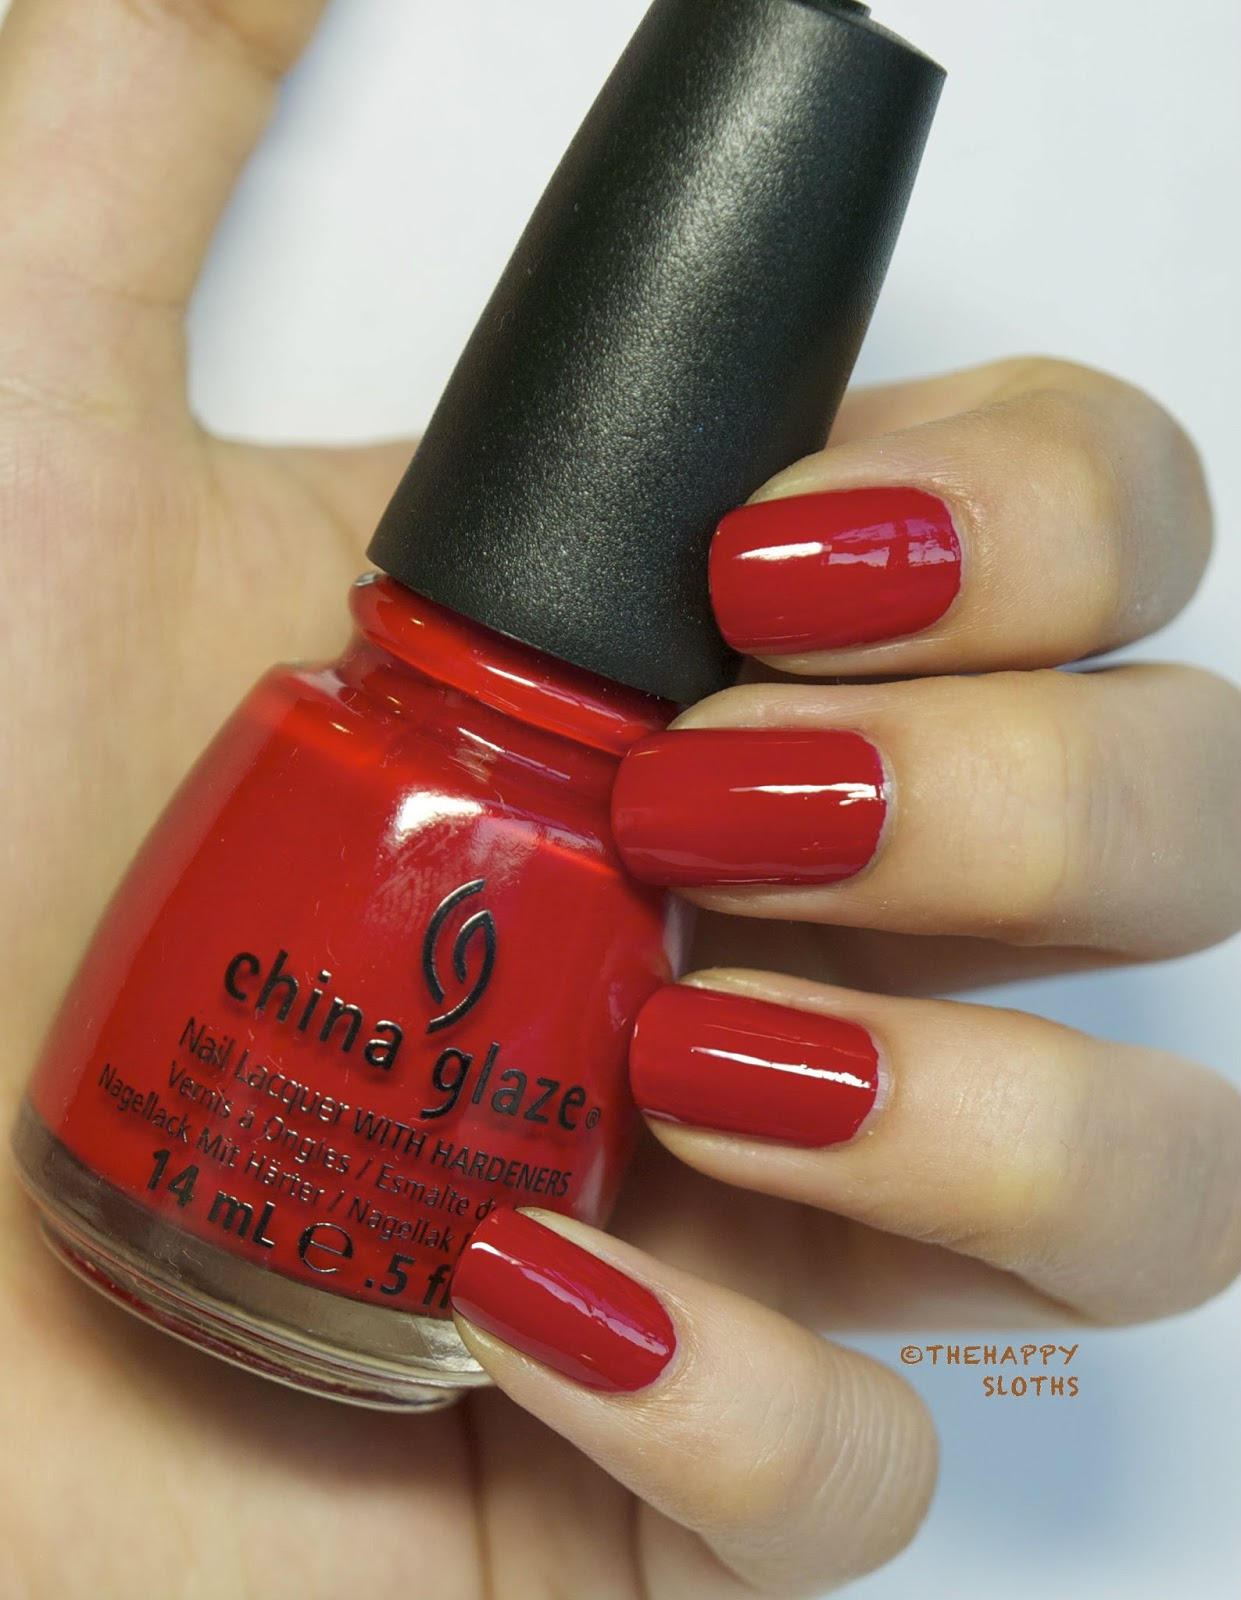 With Love" from China Glaze: Review Swatches The Happy Sloths: Beauty, Makeup, and Skincare Blog with Reviews and Swatches